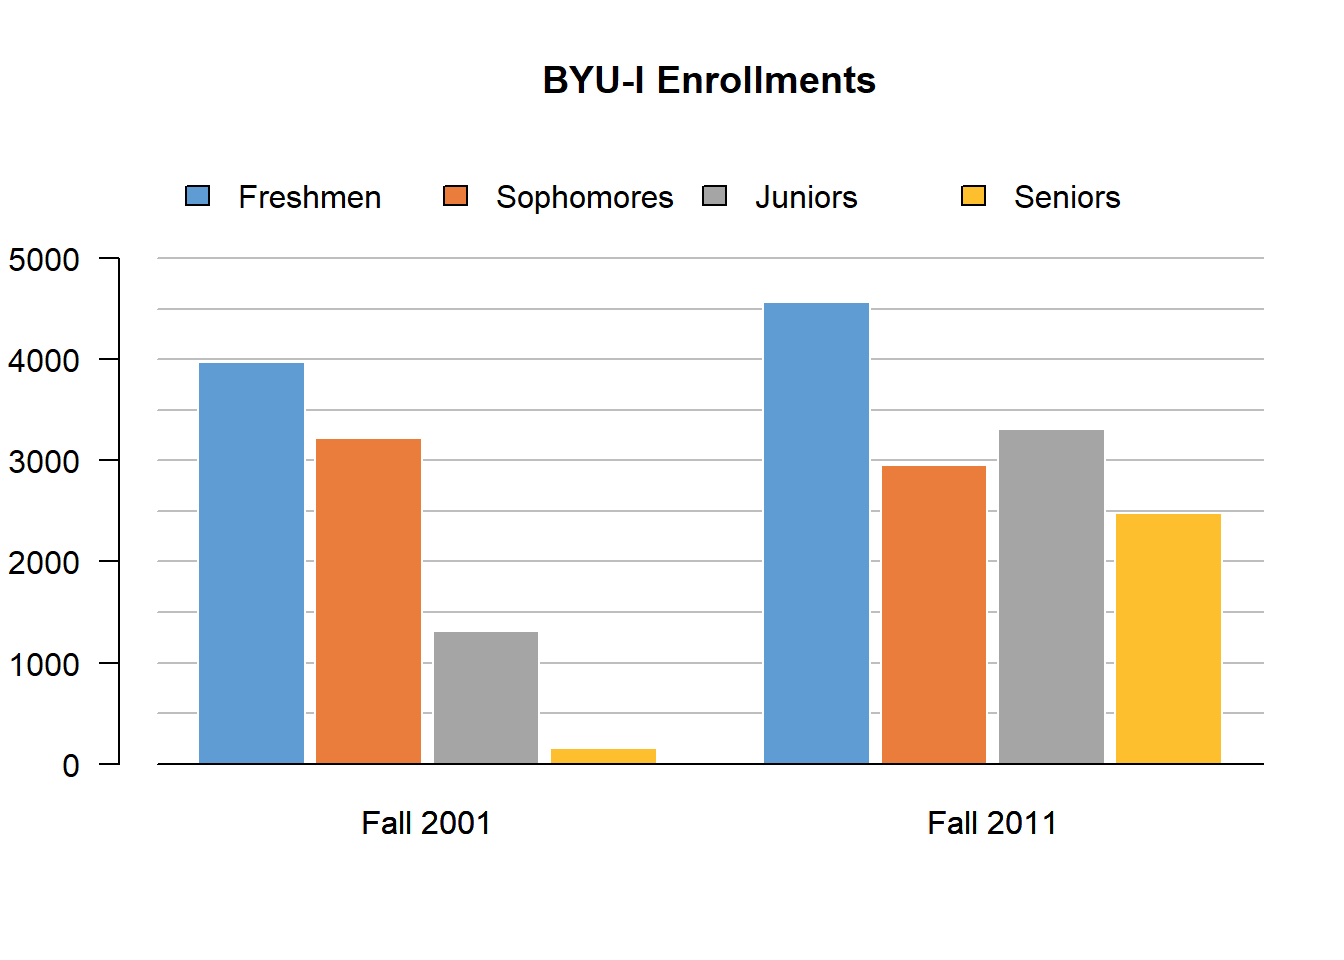 A bar chart showing the number of enrollments at BUYI in 2001 and 2011 between Freshman, Sophomores, Juniors, and Seniors. The freshmen enrollment in 2001 shows just under 4,000 students enrolled, around 3,500 sophomore enrolled, 1,500 enrolled, and around 100 seniors. Then in fall 2011 there were a little over 4,500 freshmen that enrolled, a little under 3,000 sophomores enrolled, a little under 3,500 juniors enrolled and then around 2,500 seniors enrolled.